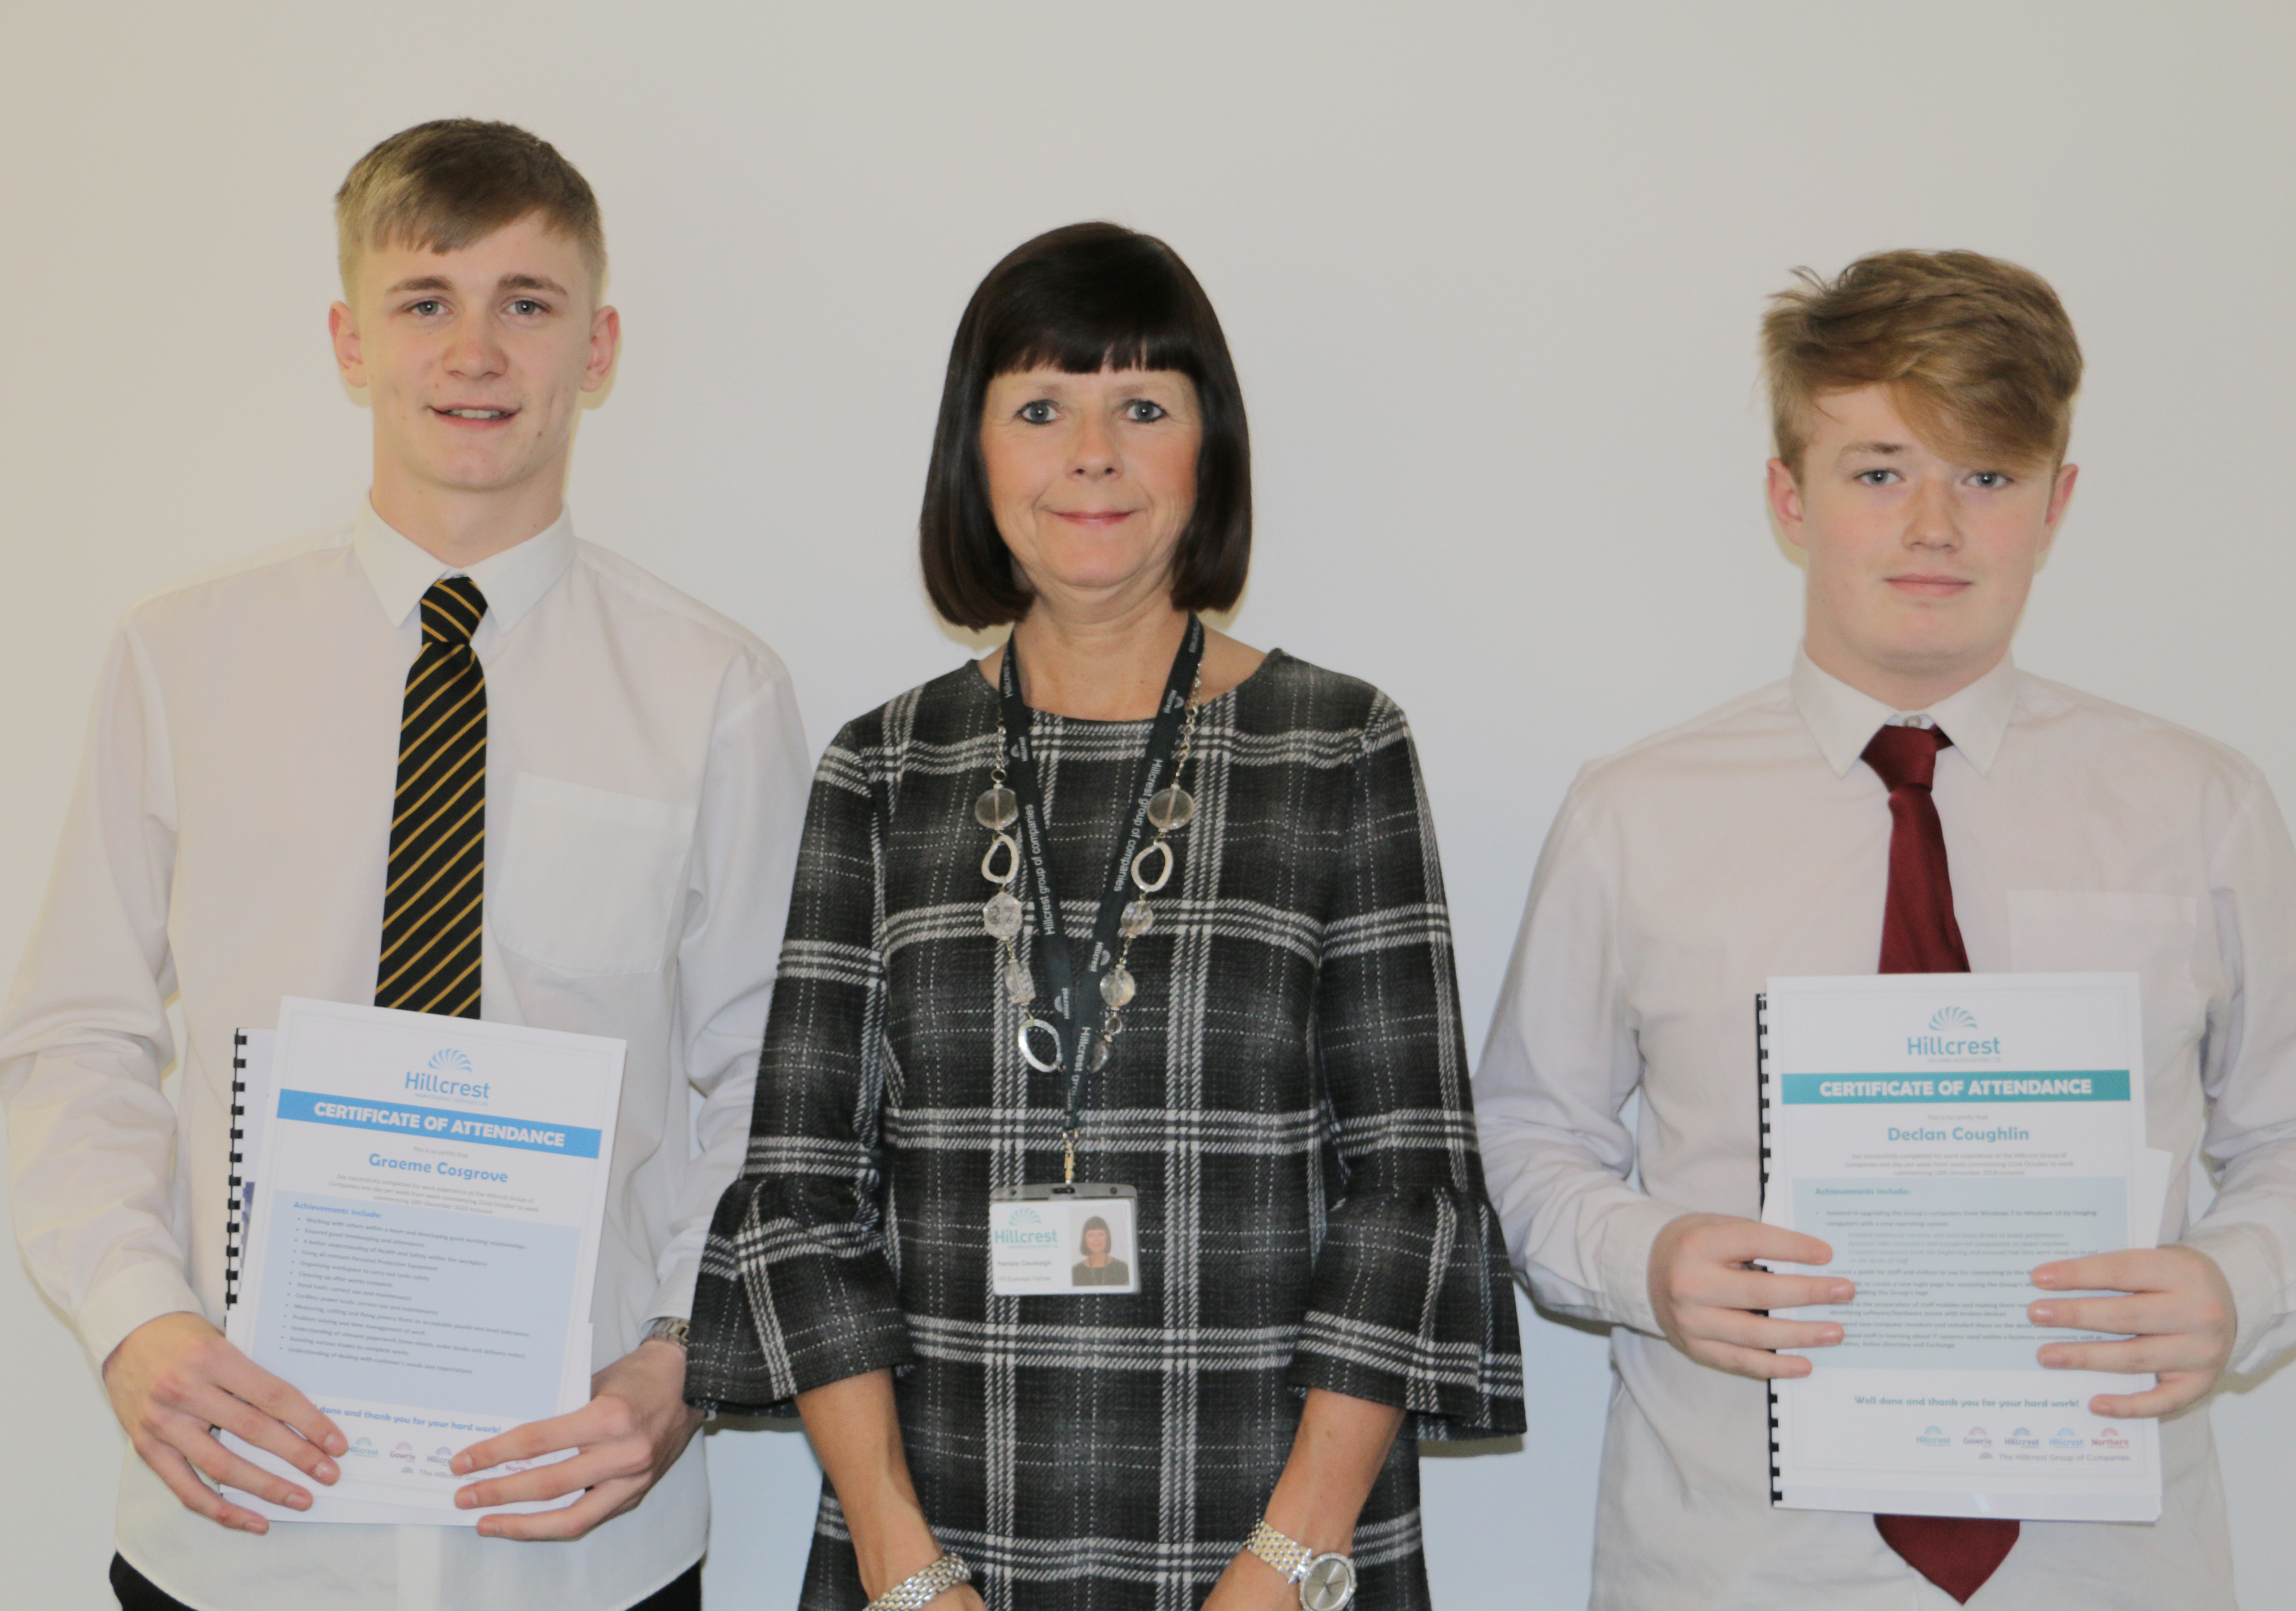 Hillcrest work experience paves career pathways for Dundee pupils